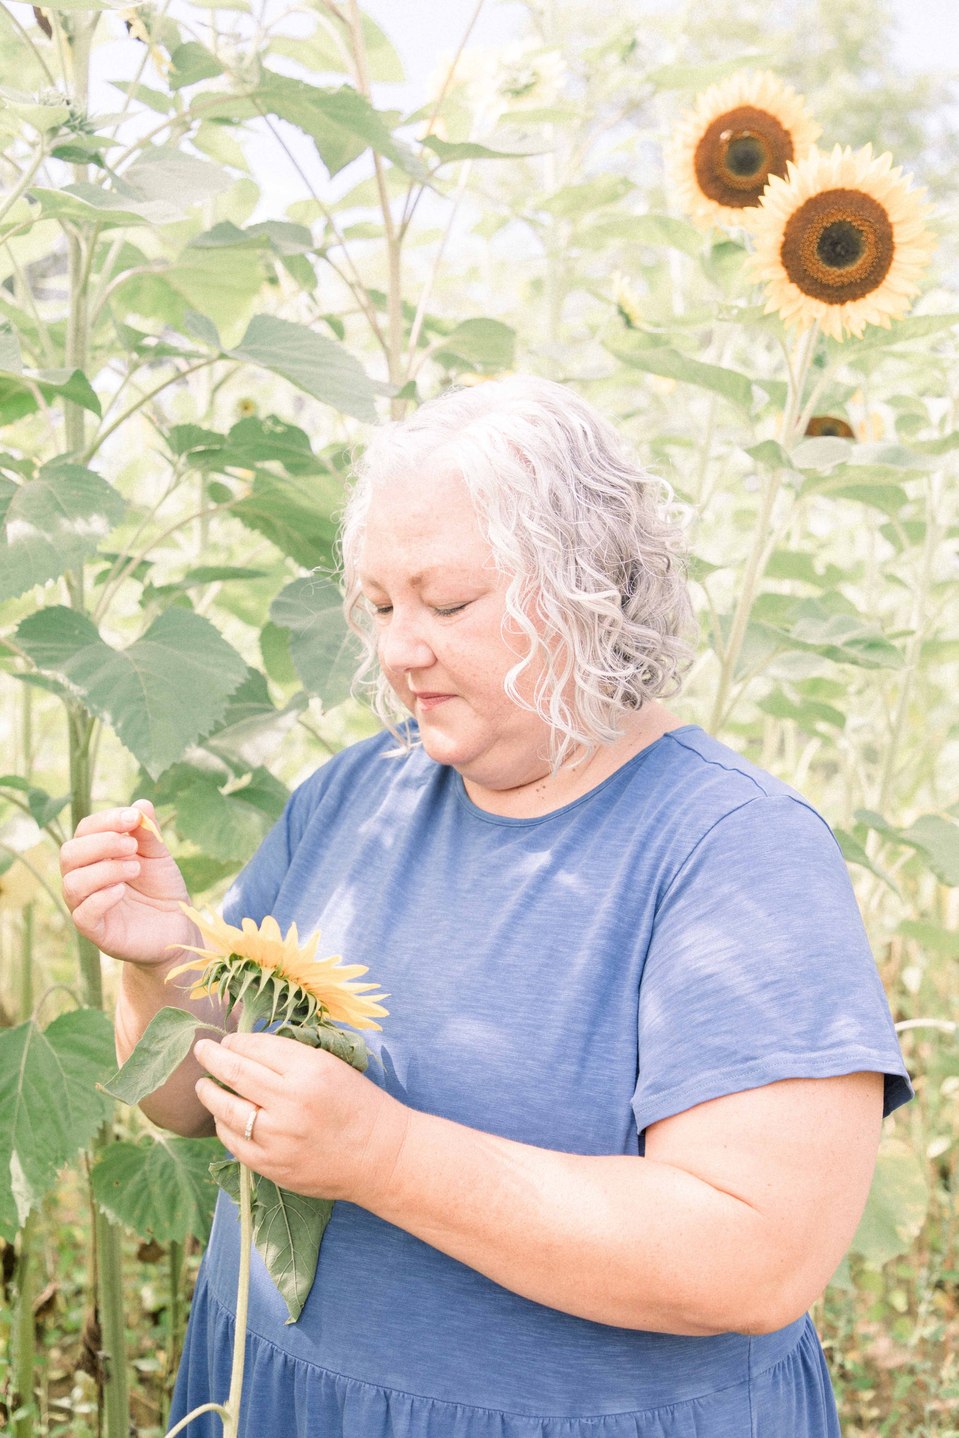 Portrait of woman holding flowers in a sunflower field, Niagara family photographer, family photography, Niagara portrait photographer, portrait photography, Emily VanderBeek Photography.